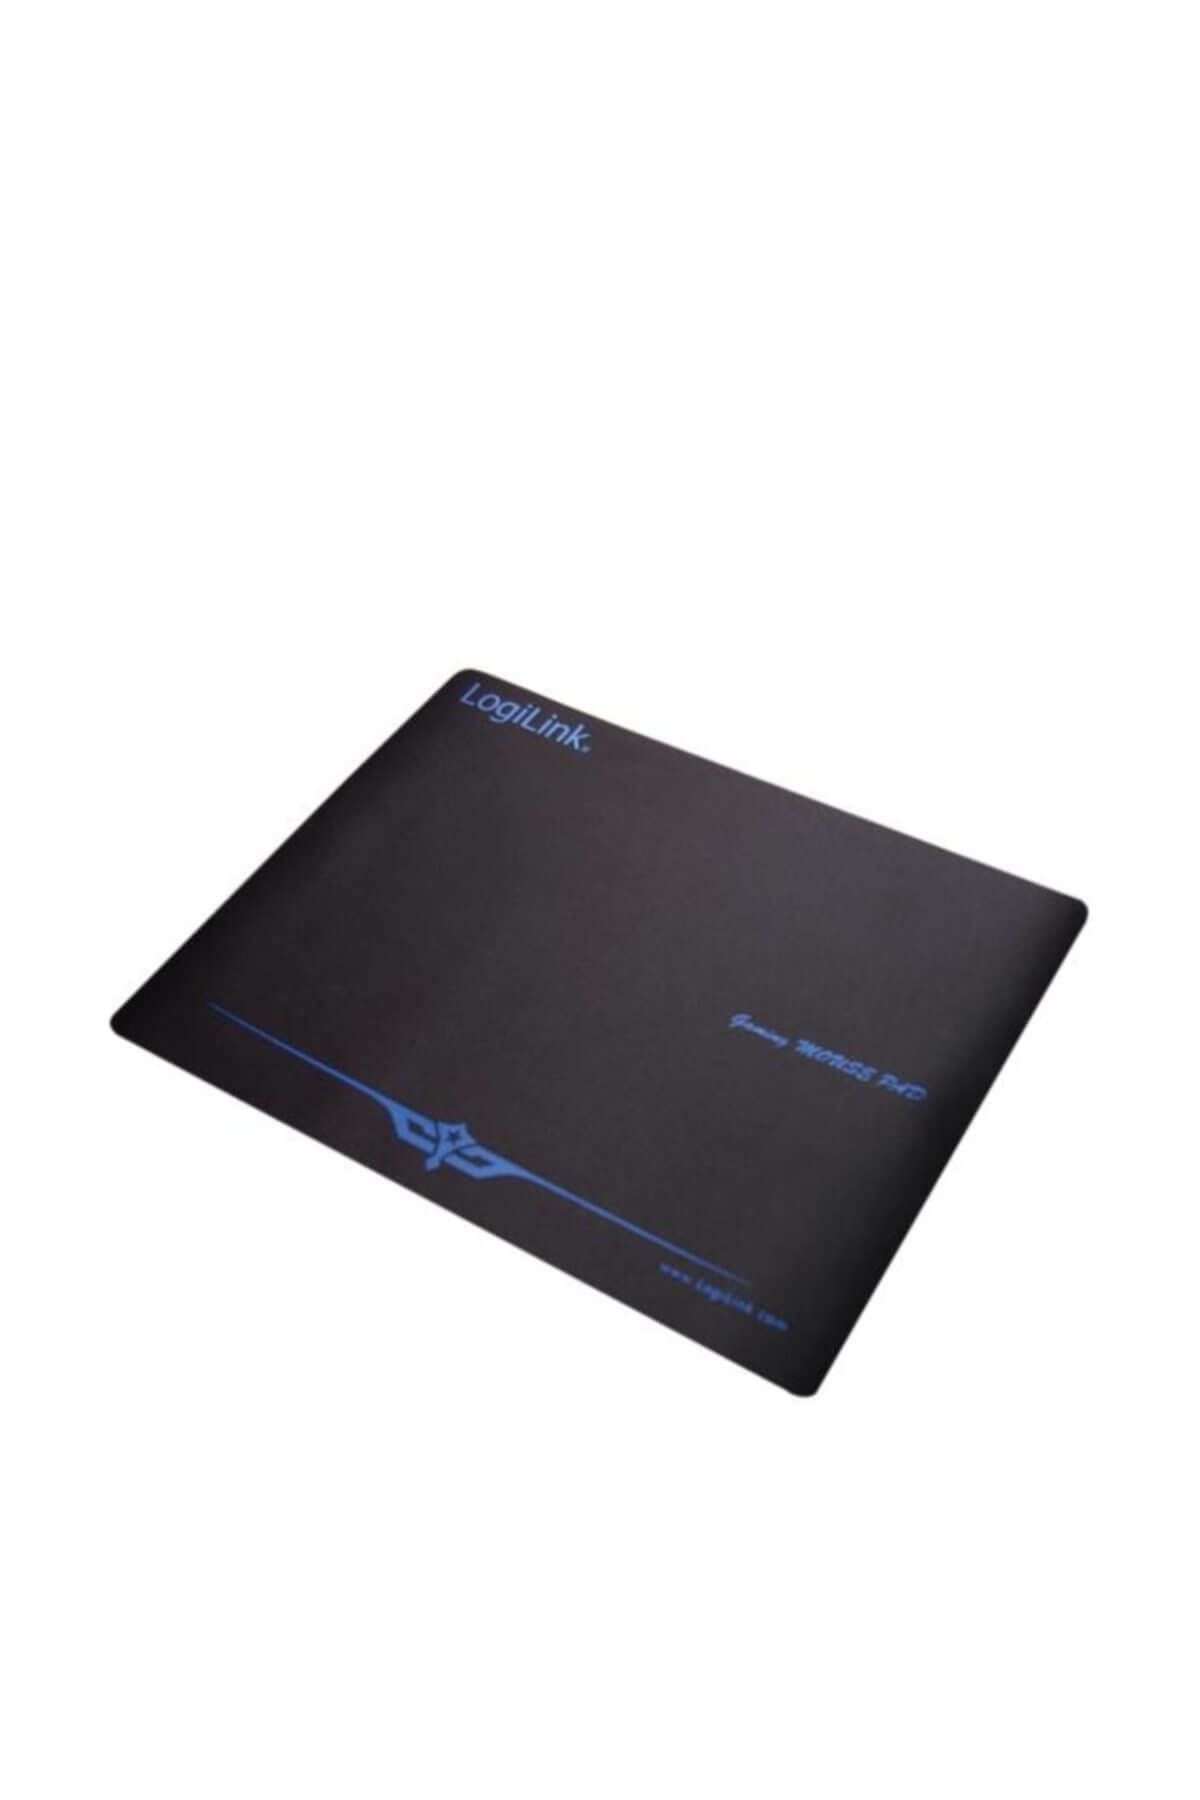 LogiLink ID0017 Gaming Mouse Pad